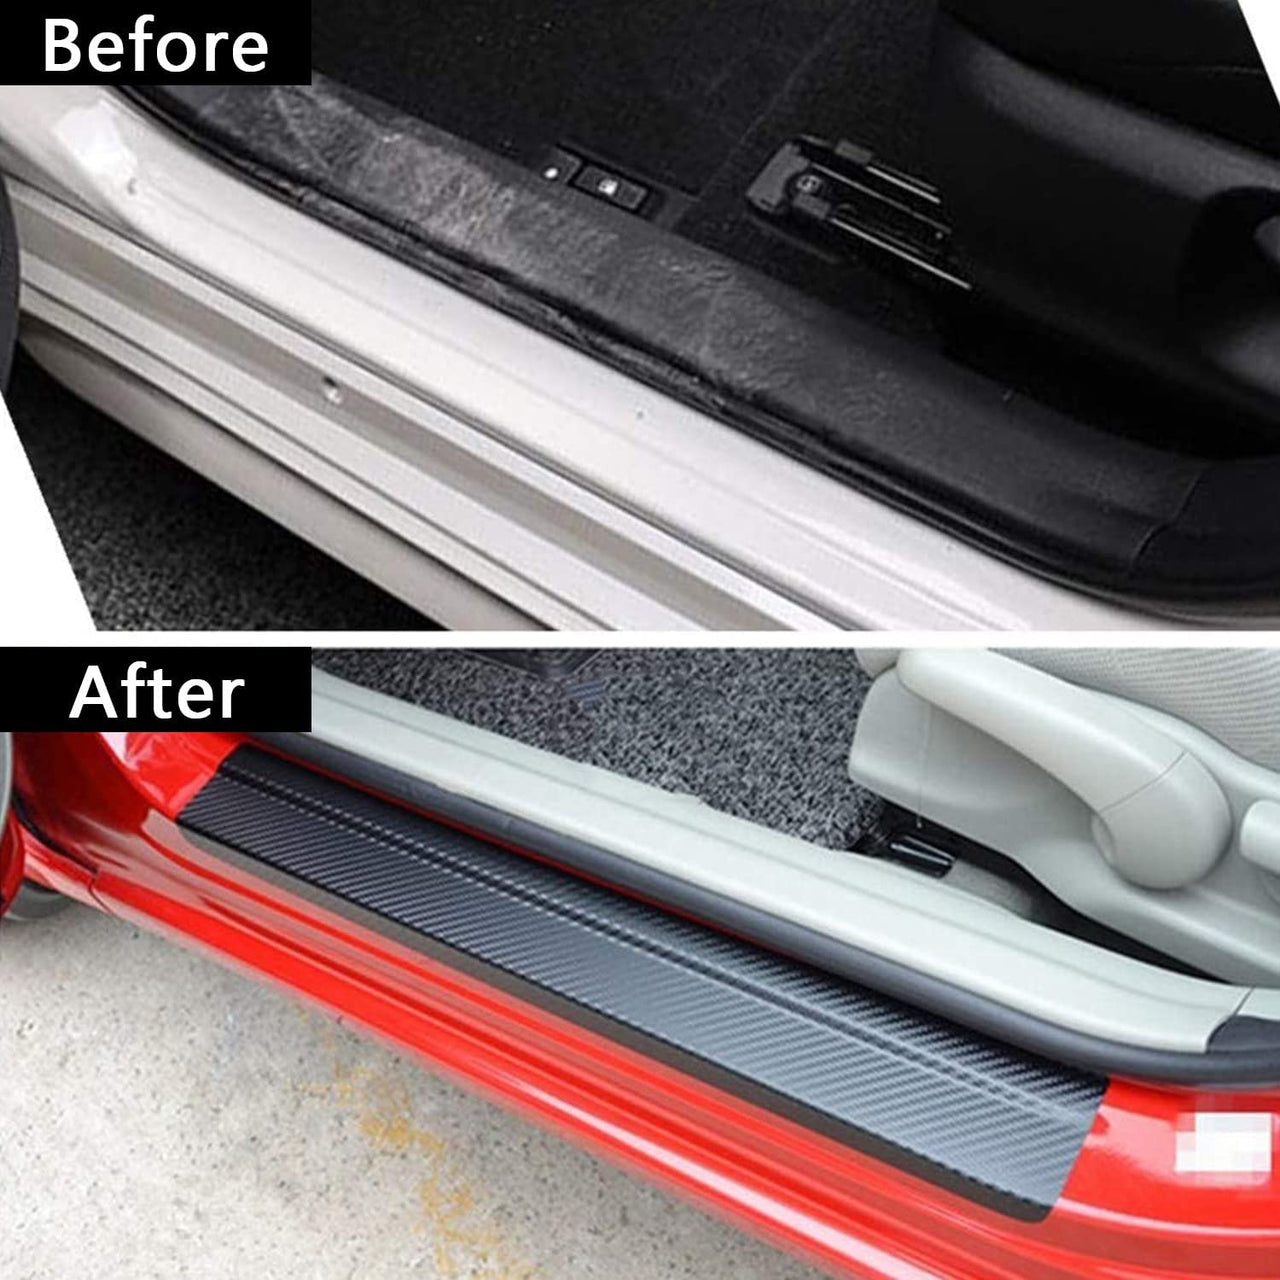 Door Sill Plate Protectors for Car Accessory, Carbon Fiber Car Door Entry Guards Sill Scuff Cover Panel Step Protector, Welcome Pedal Protector Cover, 4pcs/Set